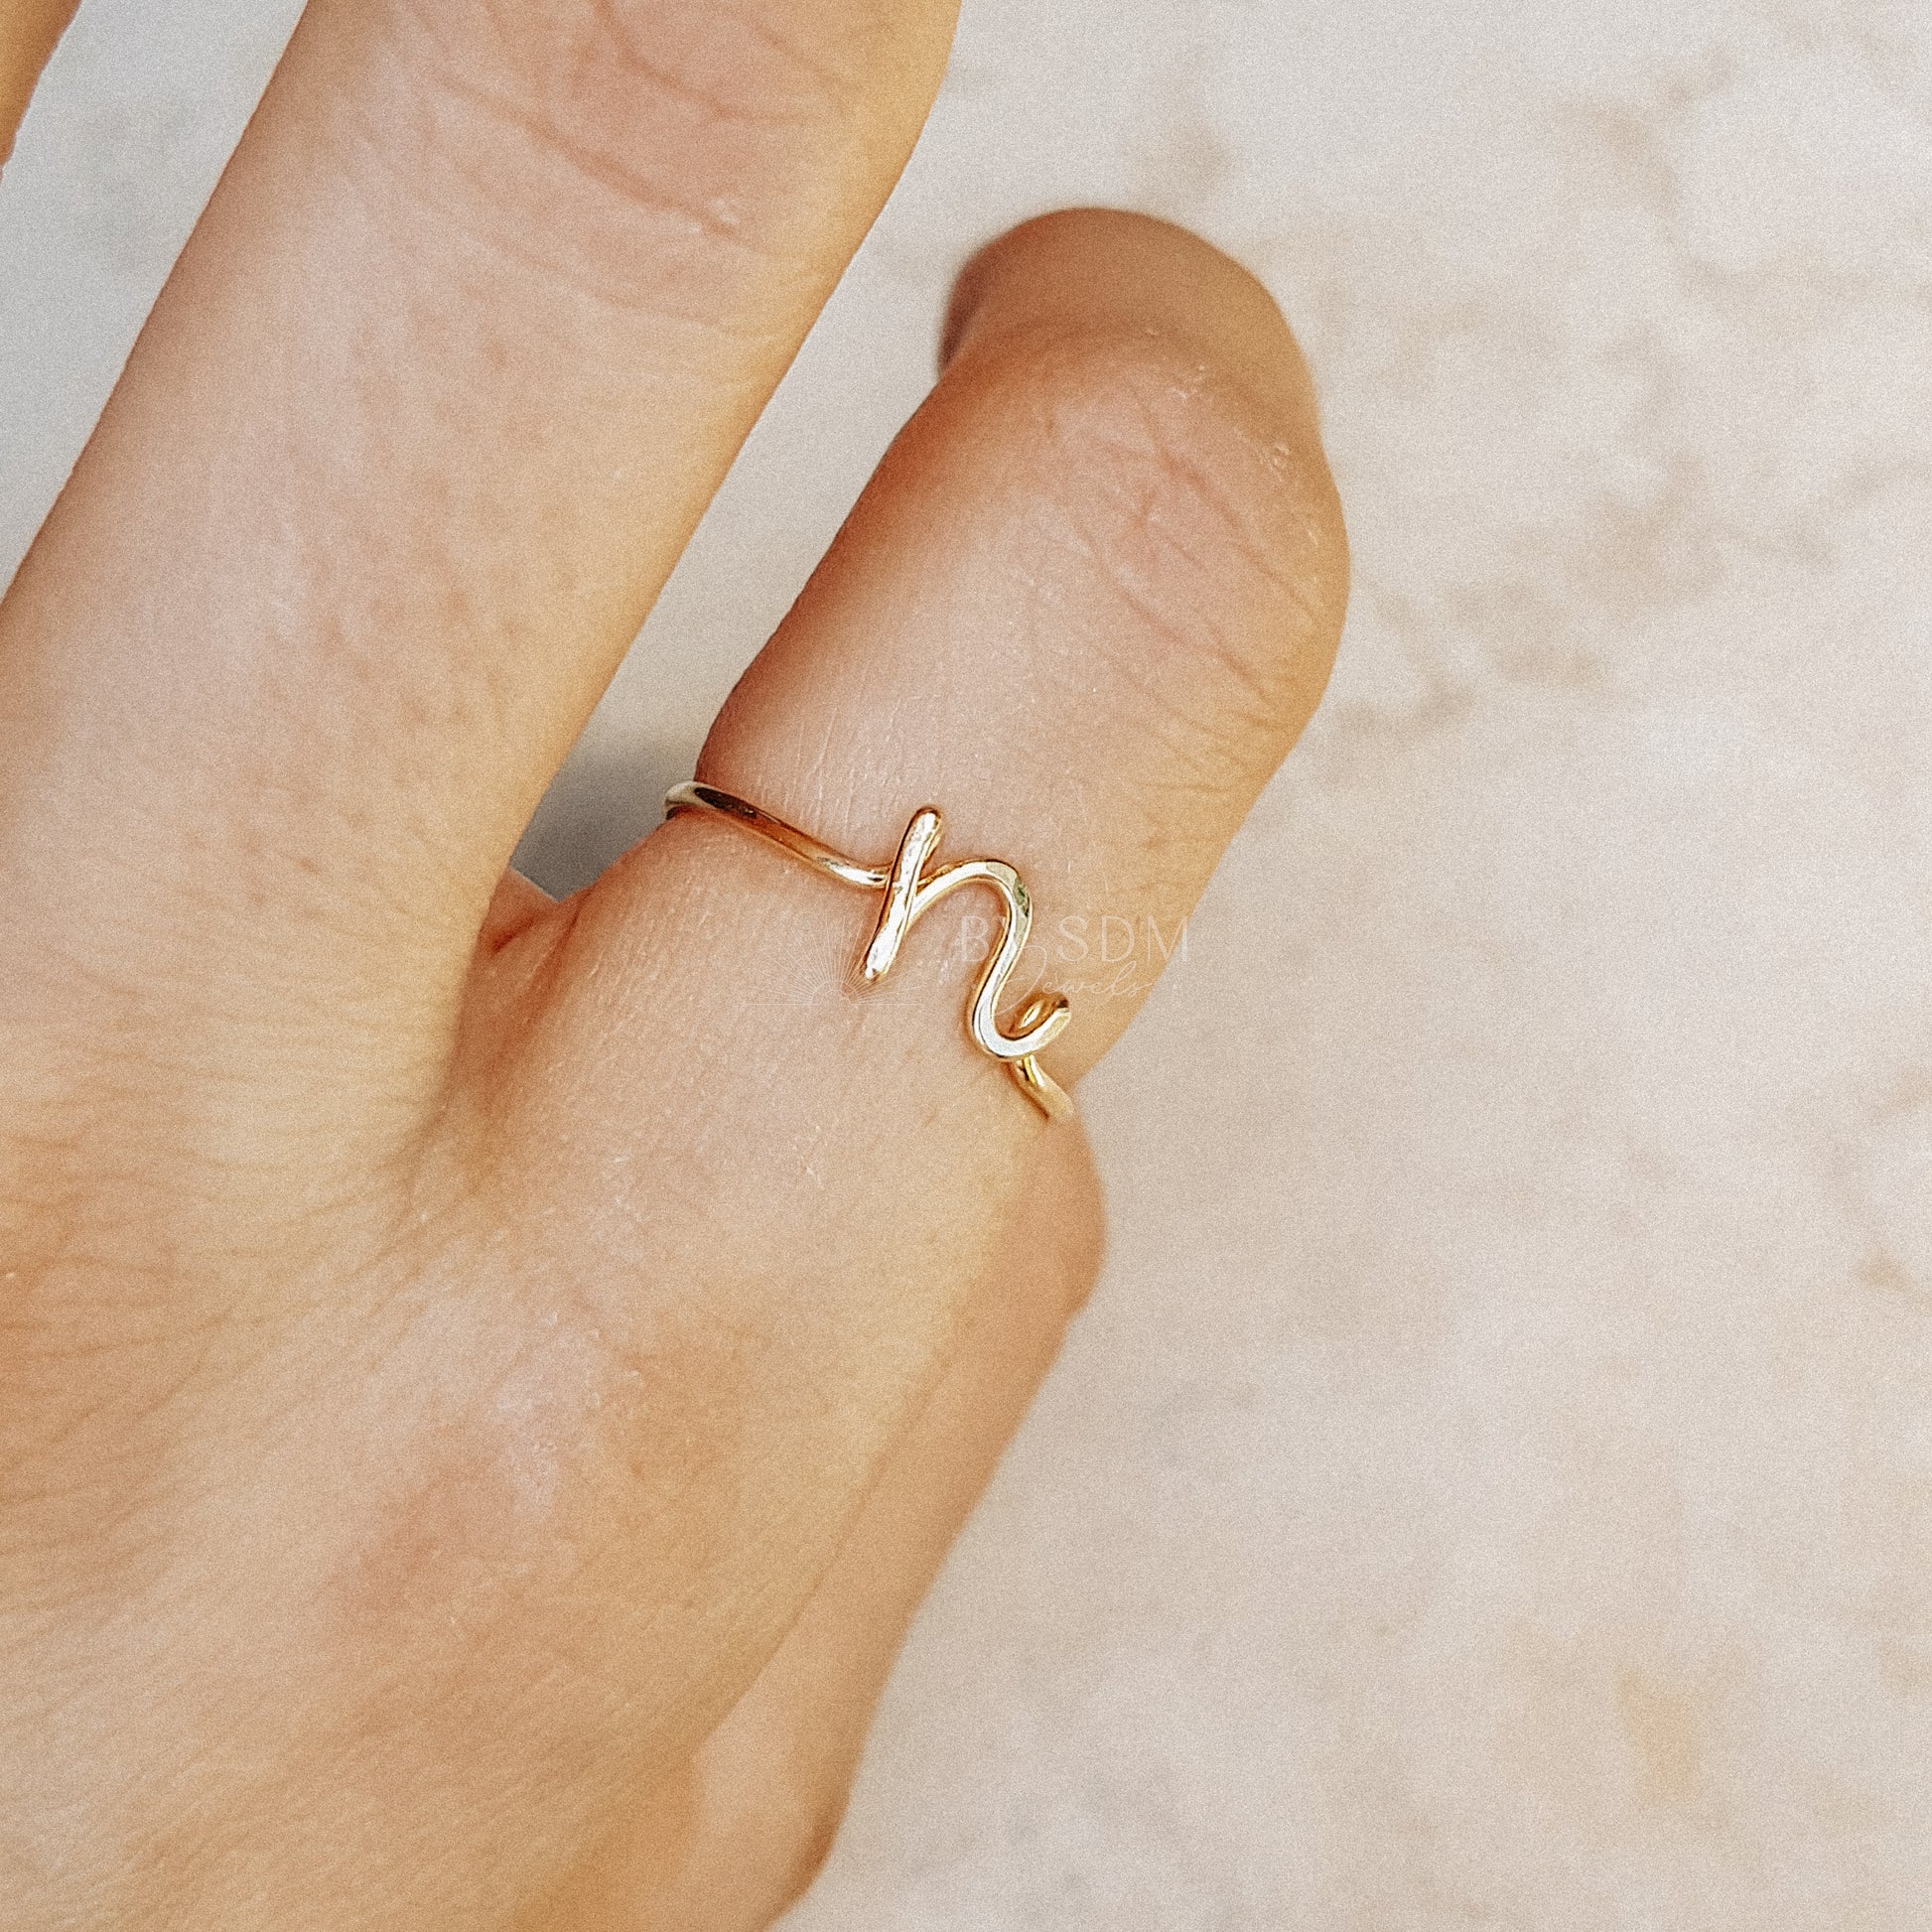 Custom Initial Name Ring • Gold Letter N Ring • Personalized Initial Ring • Initial Name Ring • Adjustable Initial Ring • BYSDMJEWELS